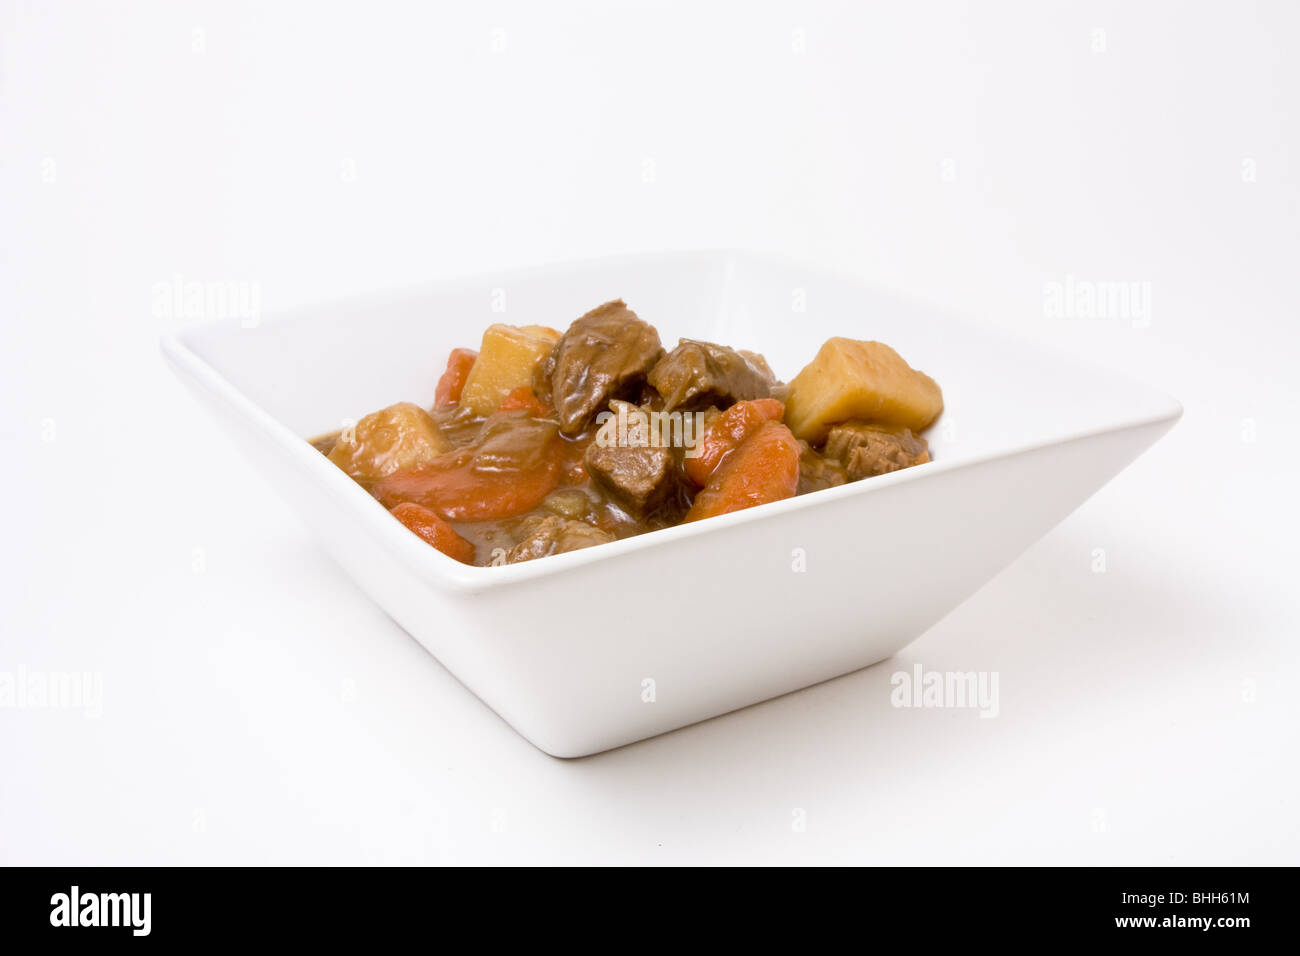 Beef stew or Goulash in white bowl isolated against white background. Stock Photo